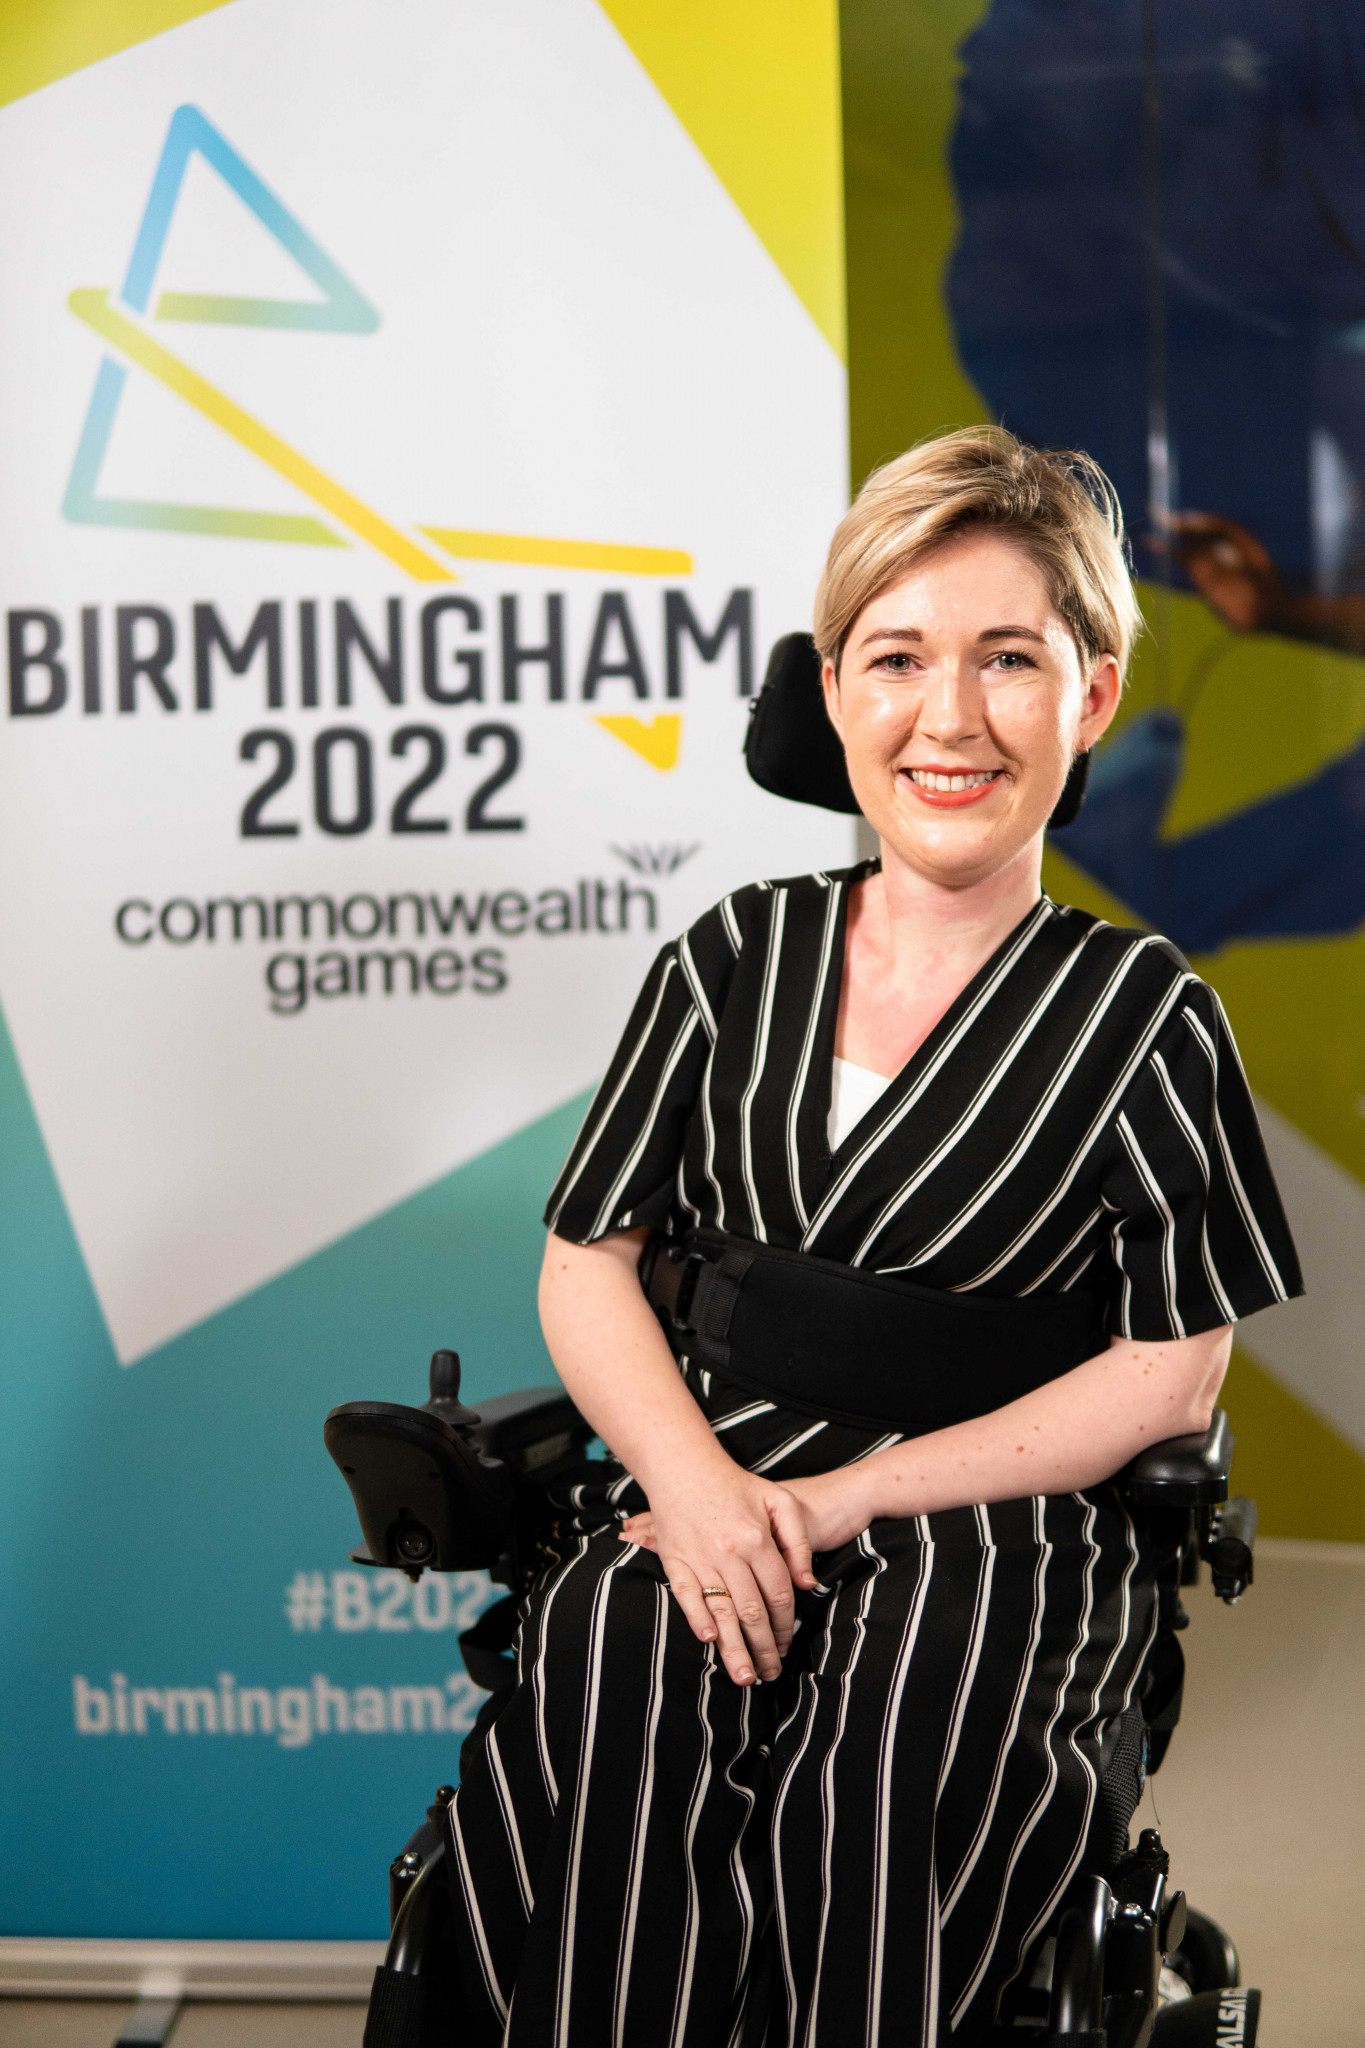 Birmingham 2022 publishes Accessibility and Inclusion Commitment